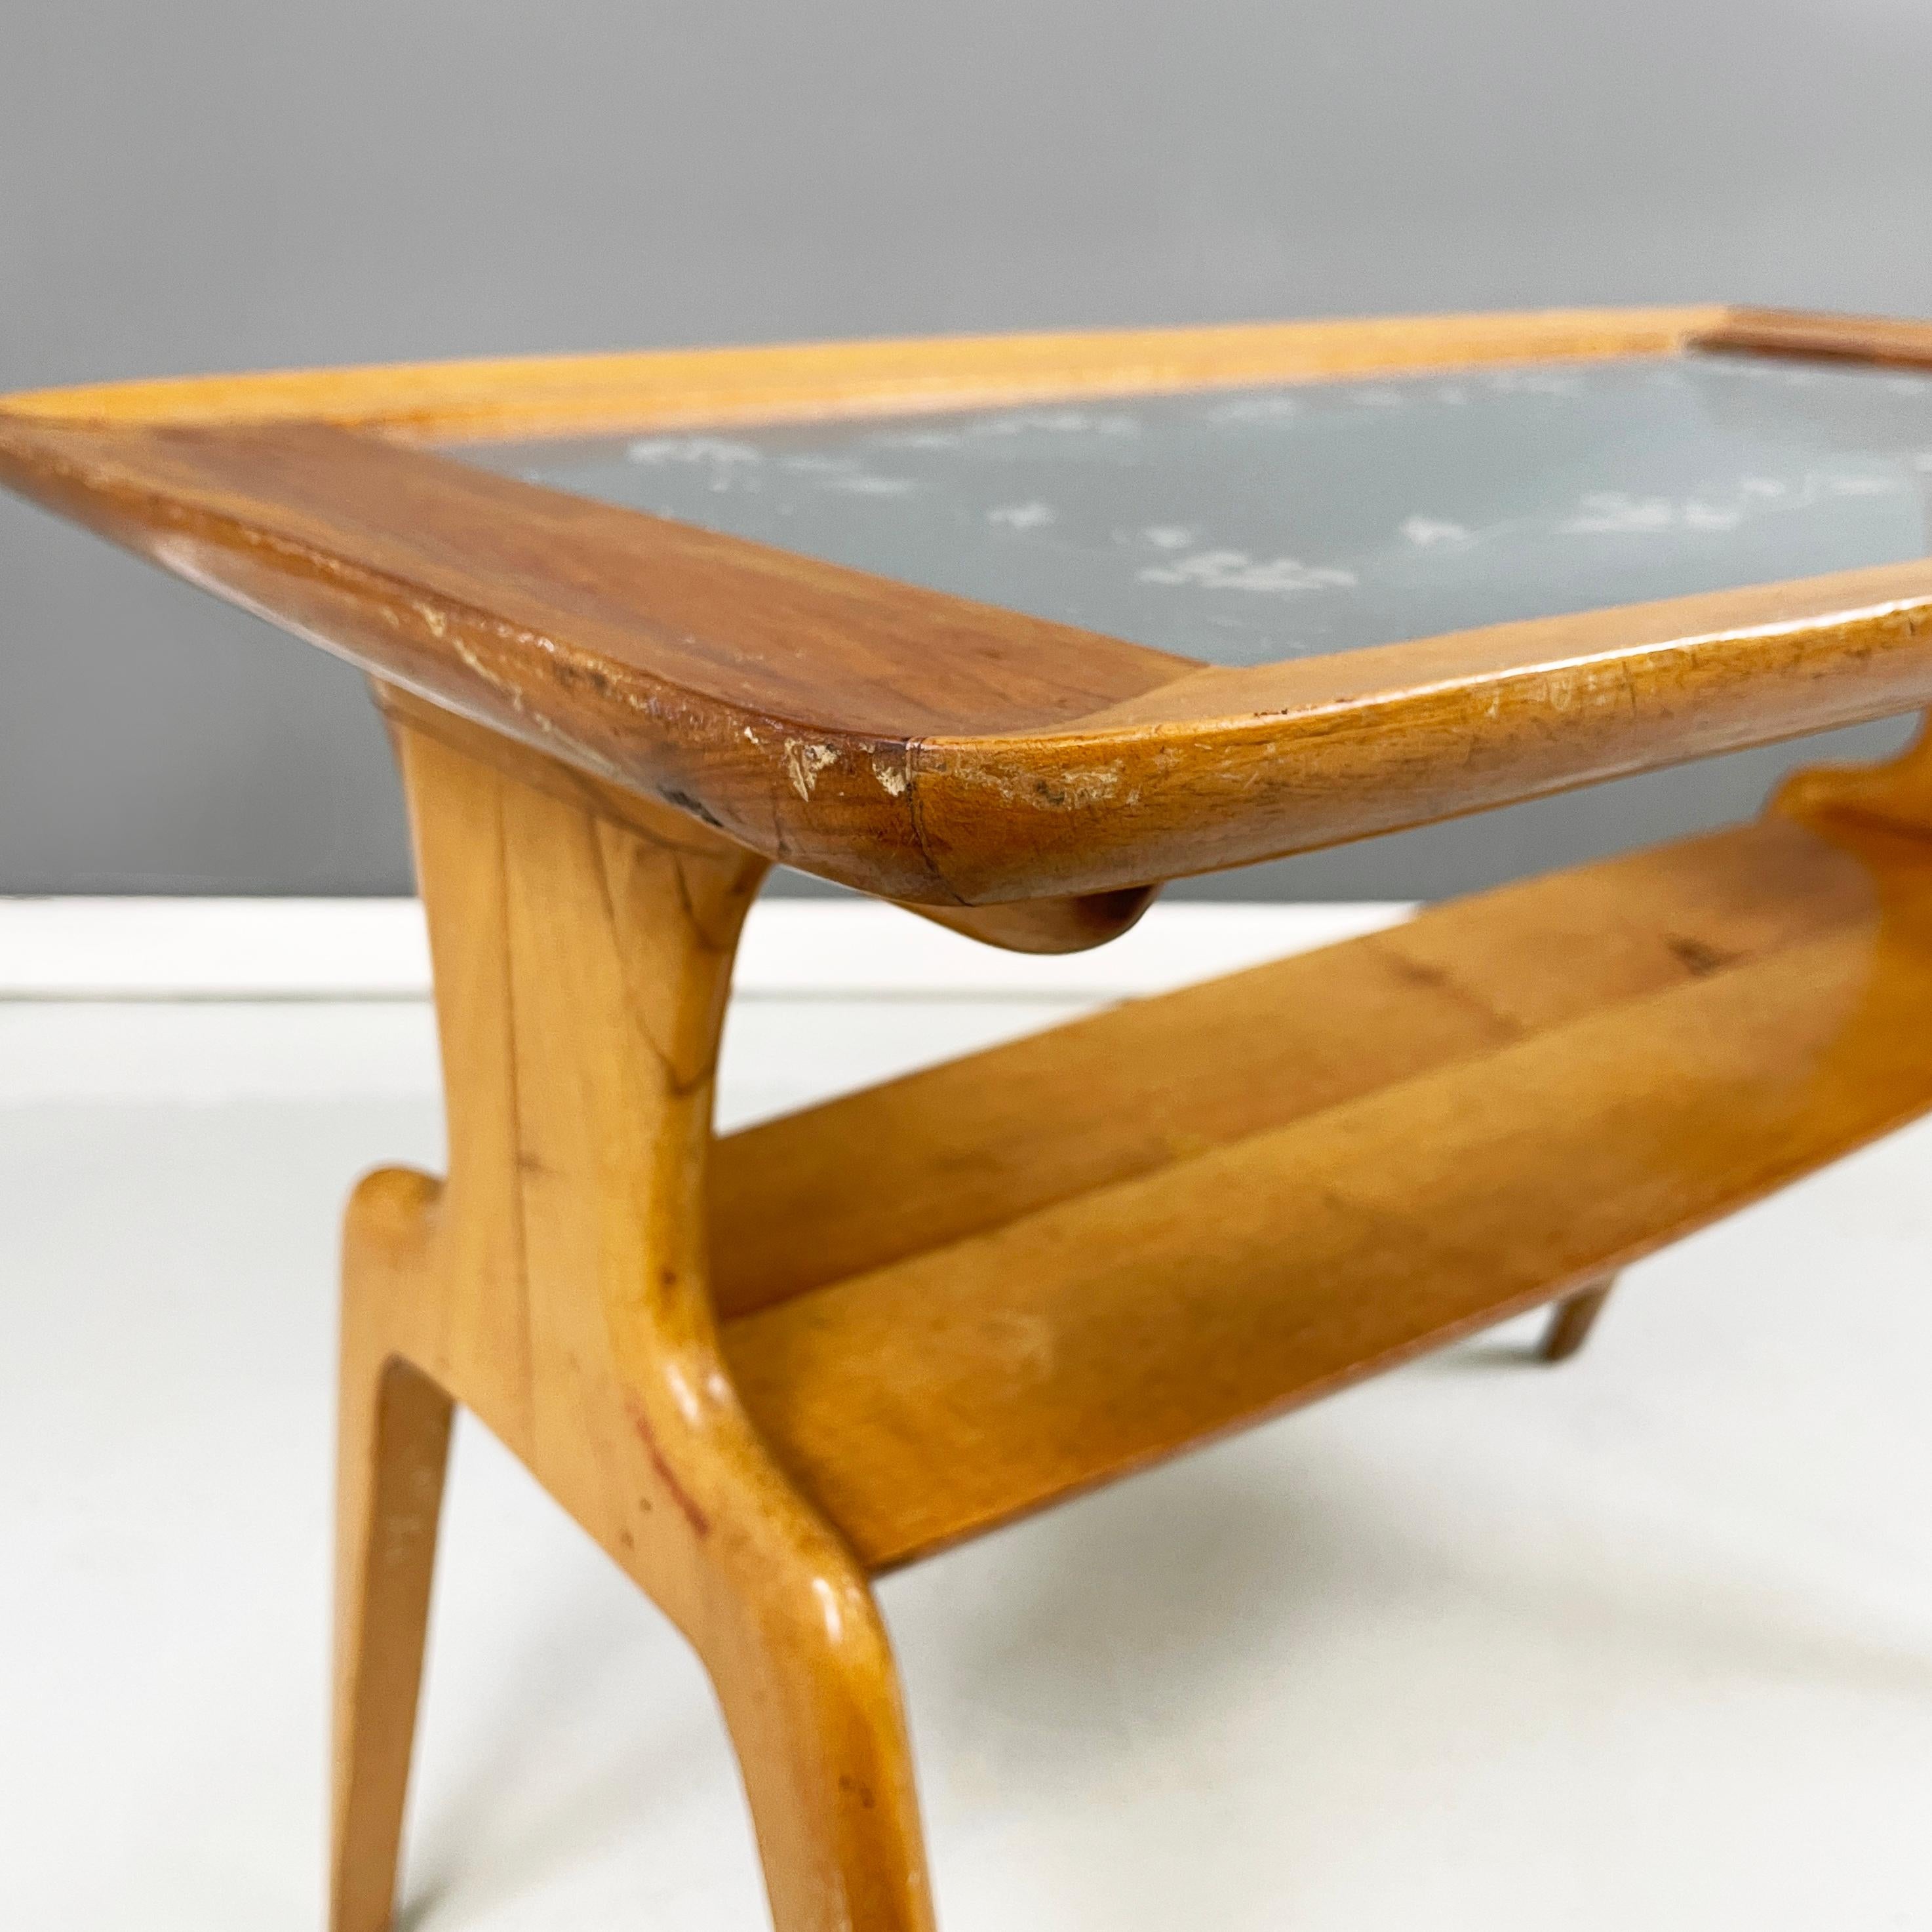 Italian mid-century modern Coffee table in wood and decorated glass, 1950s For Sale 1